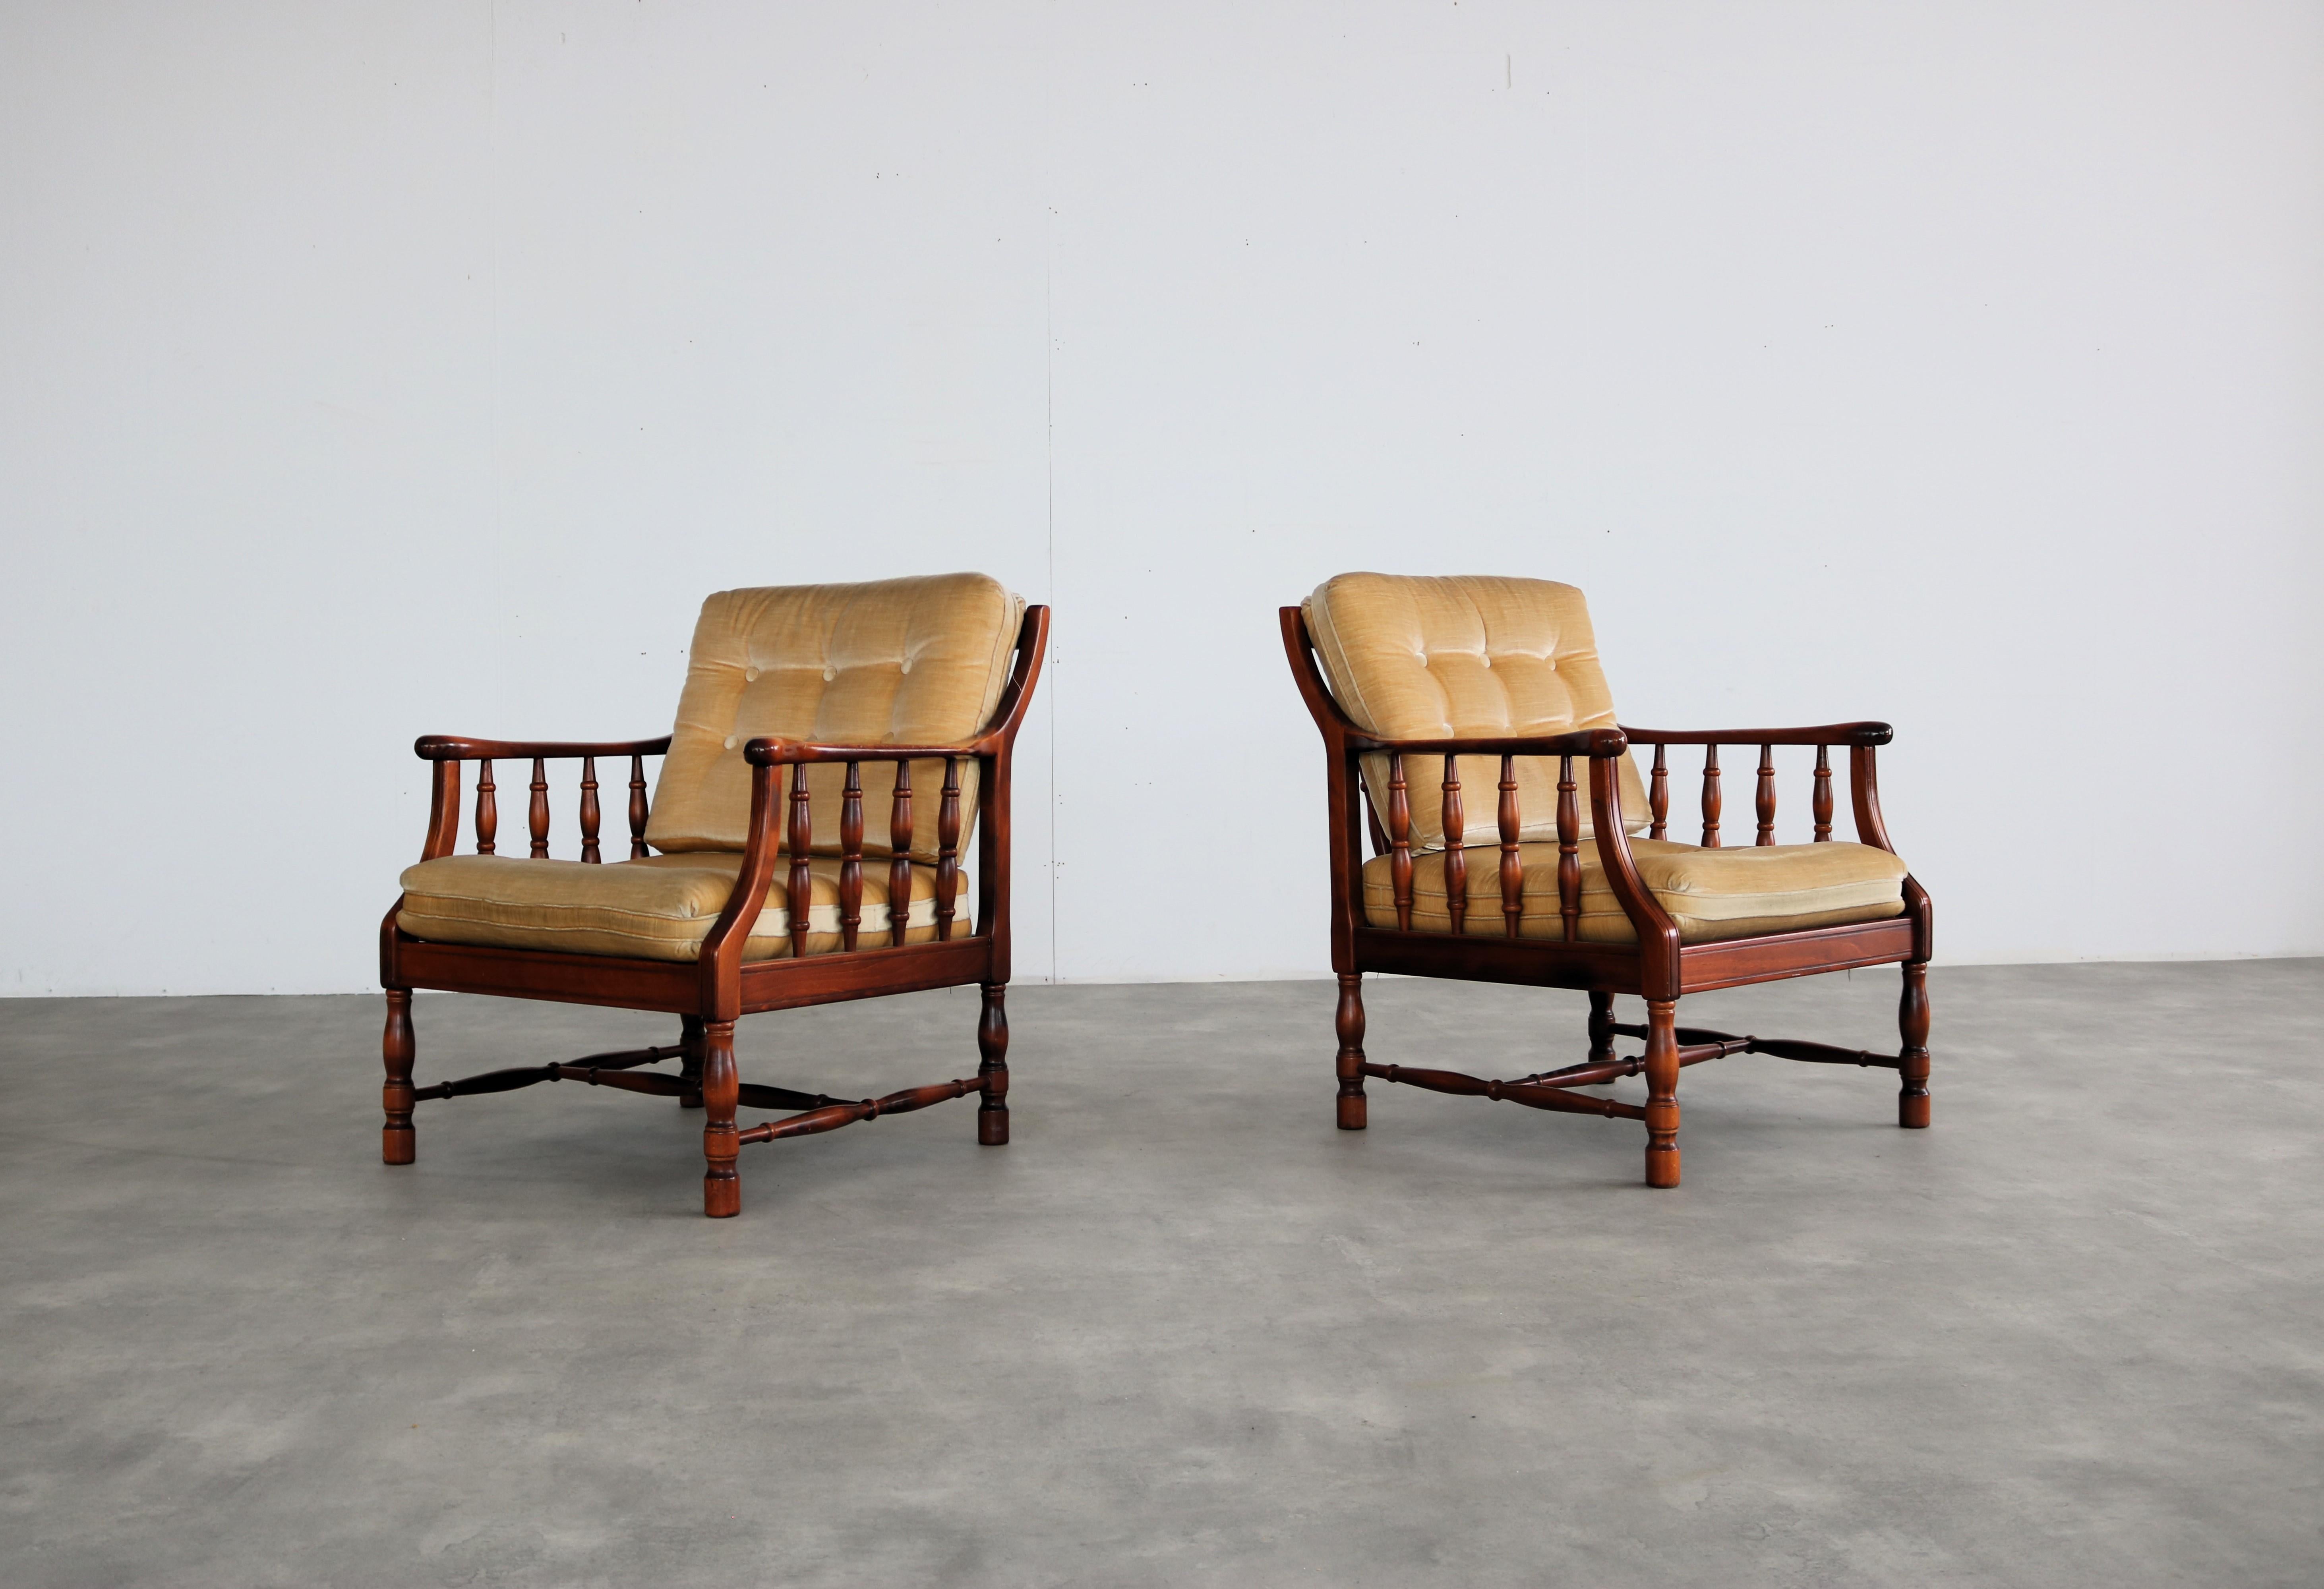 vintage armchairs  easy chairs  60s  Sweden

period  60's
design  unknown  Sweden
condition  good  light signs of use
size  84 x 73 x 78 (hxwxd) seat height 41;

details  teak; upholstery; 2 pieces available; price per piece;

article number  2307